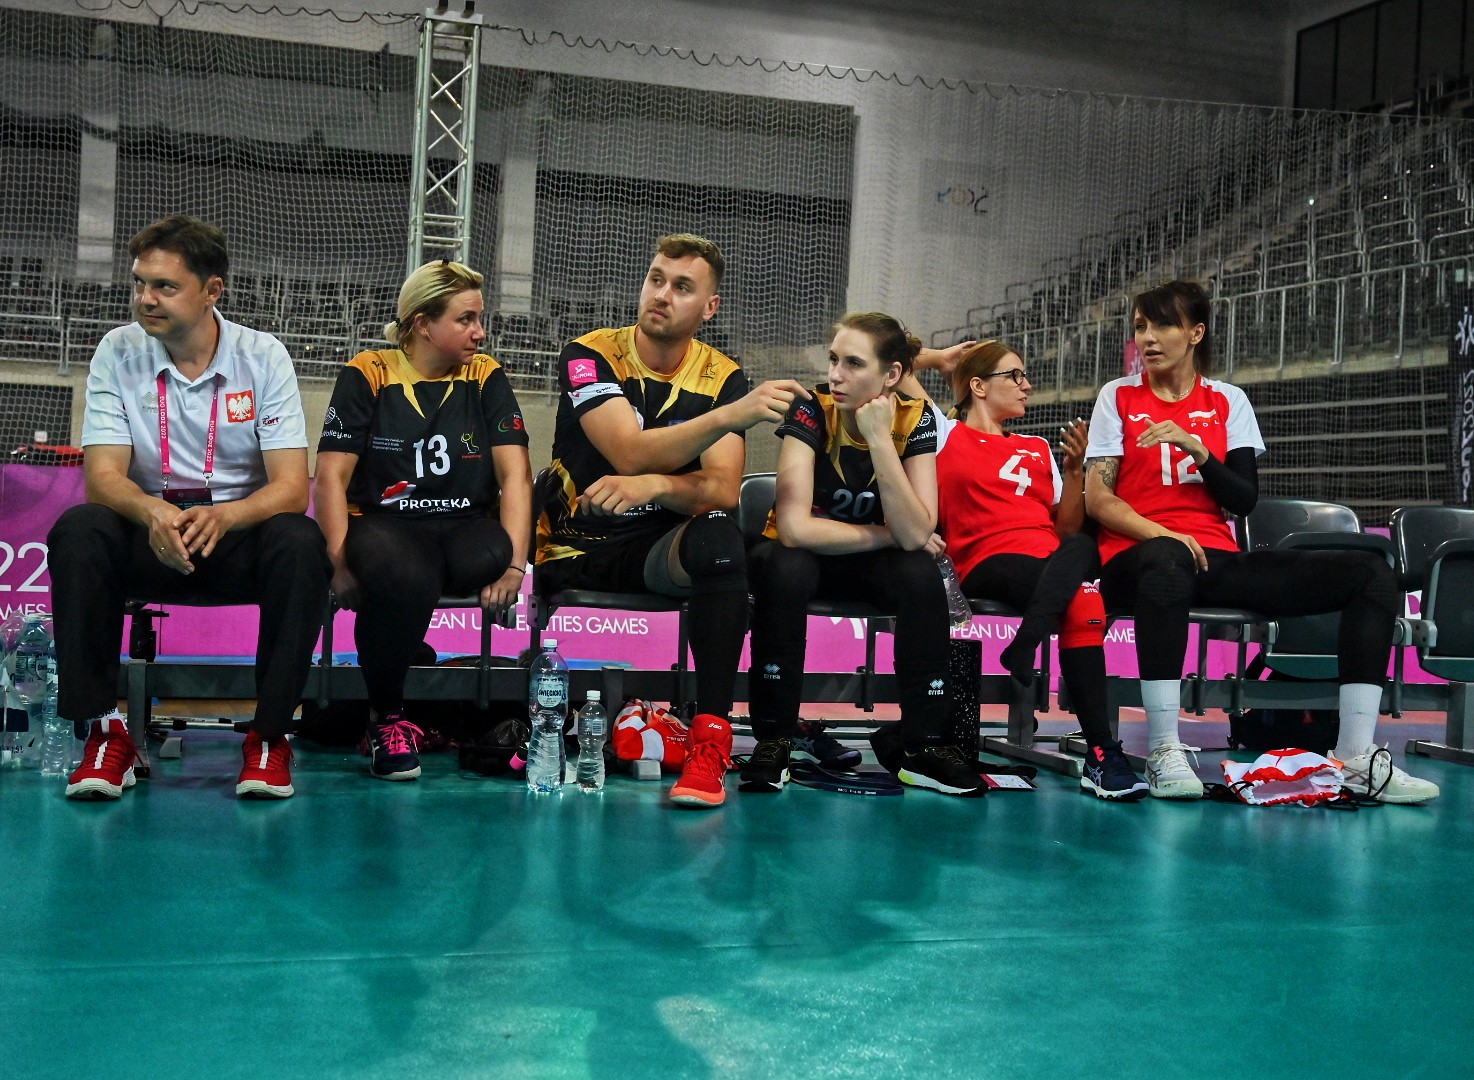 Day 4 - Sitting Volleyball